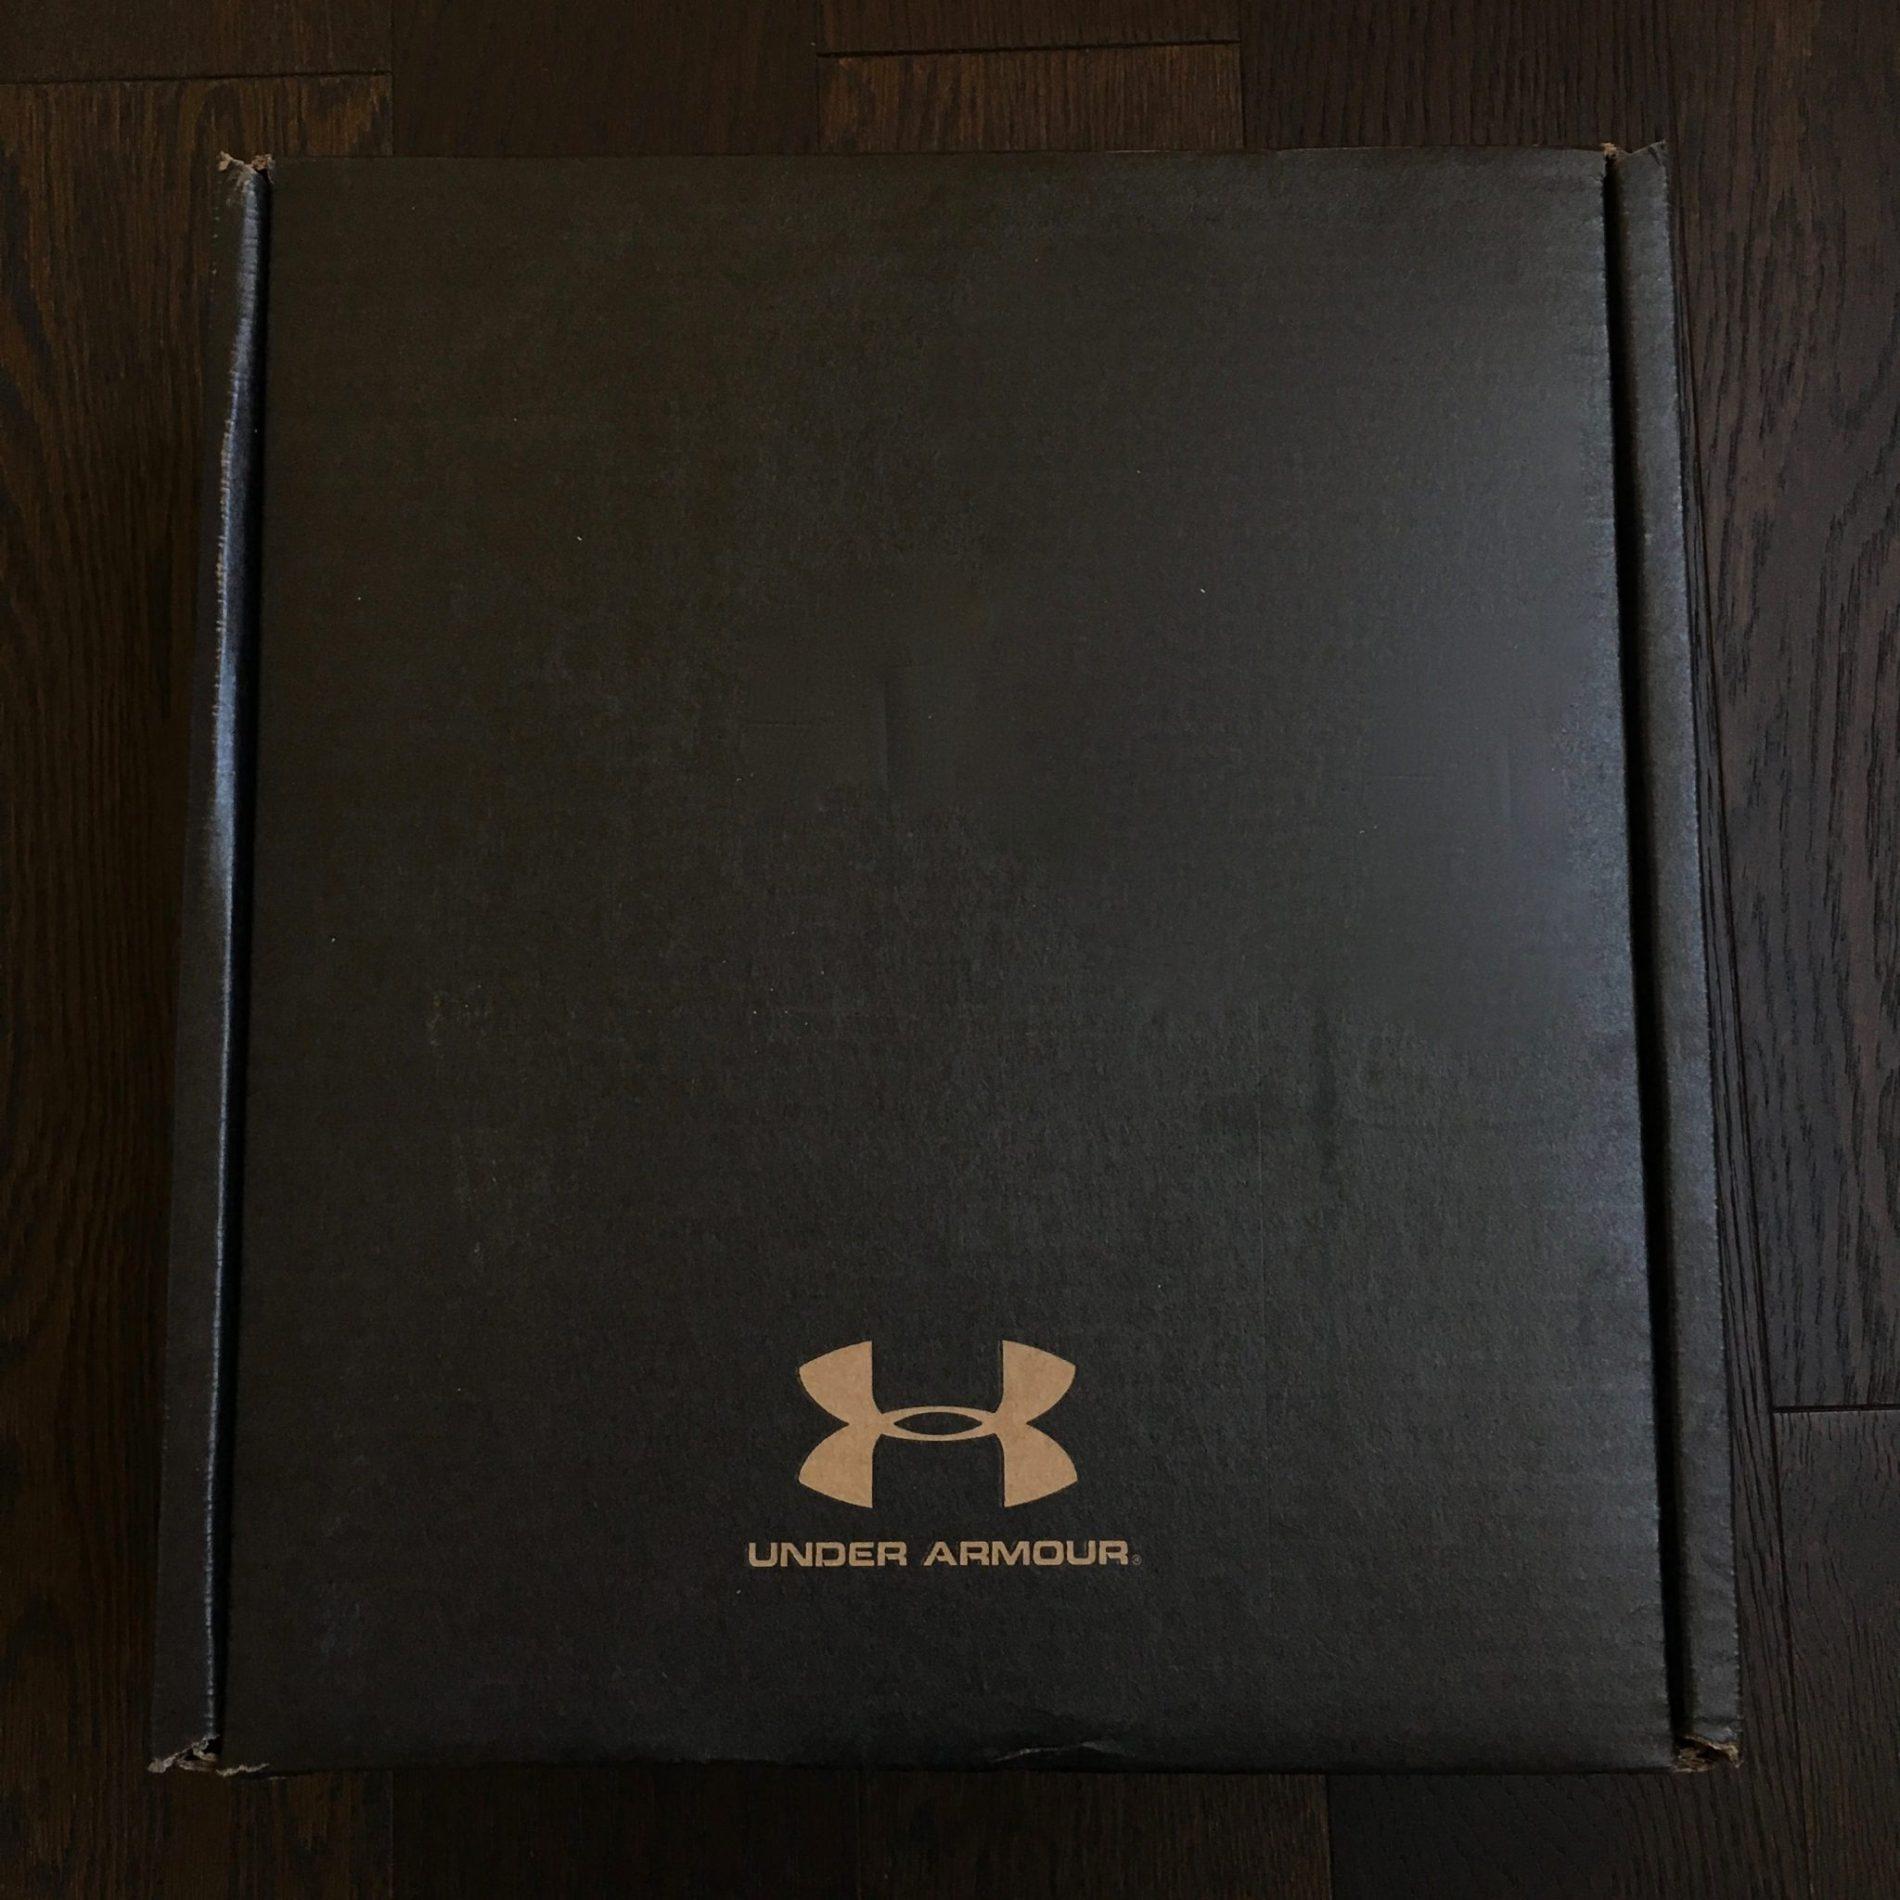 Under Armour ArmourBox Review - March 2018 - Subscription Box Ramblings